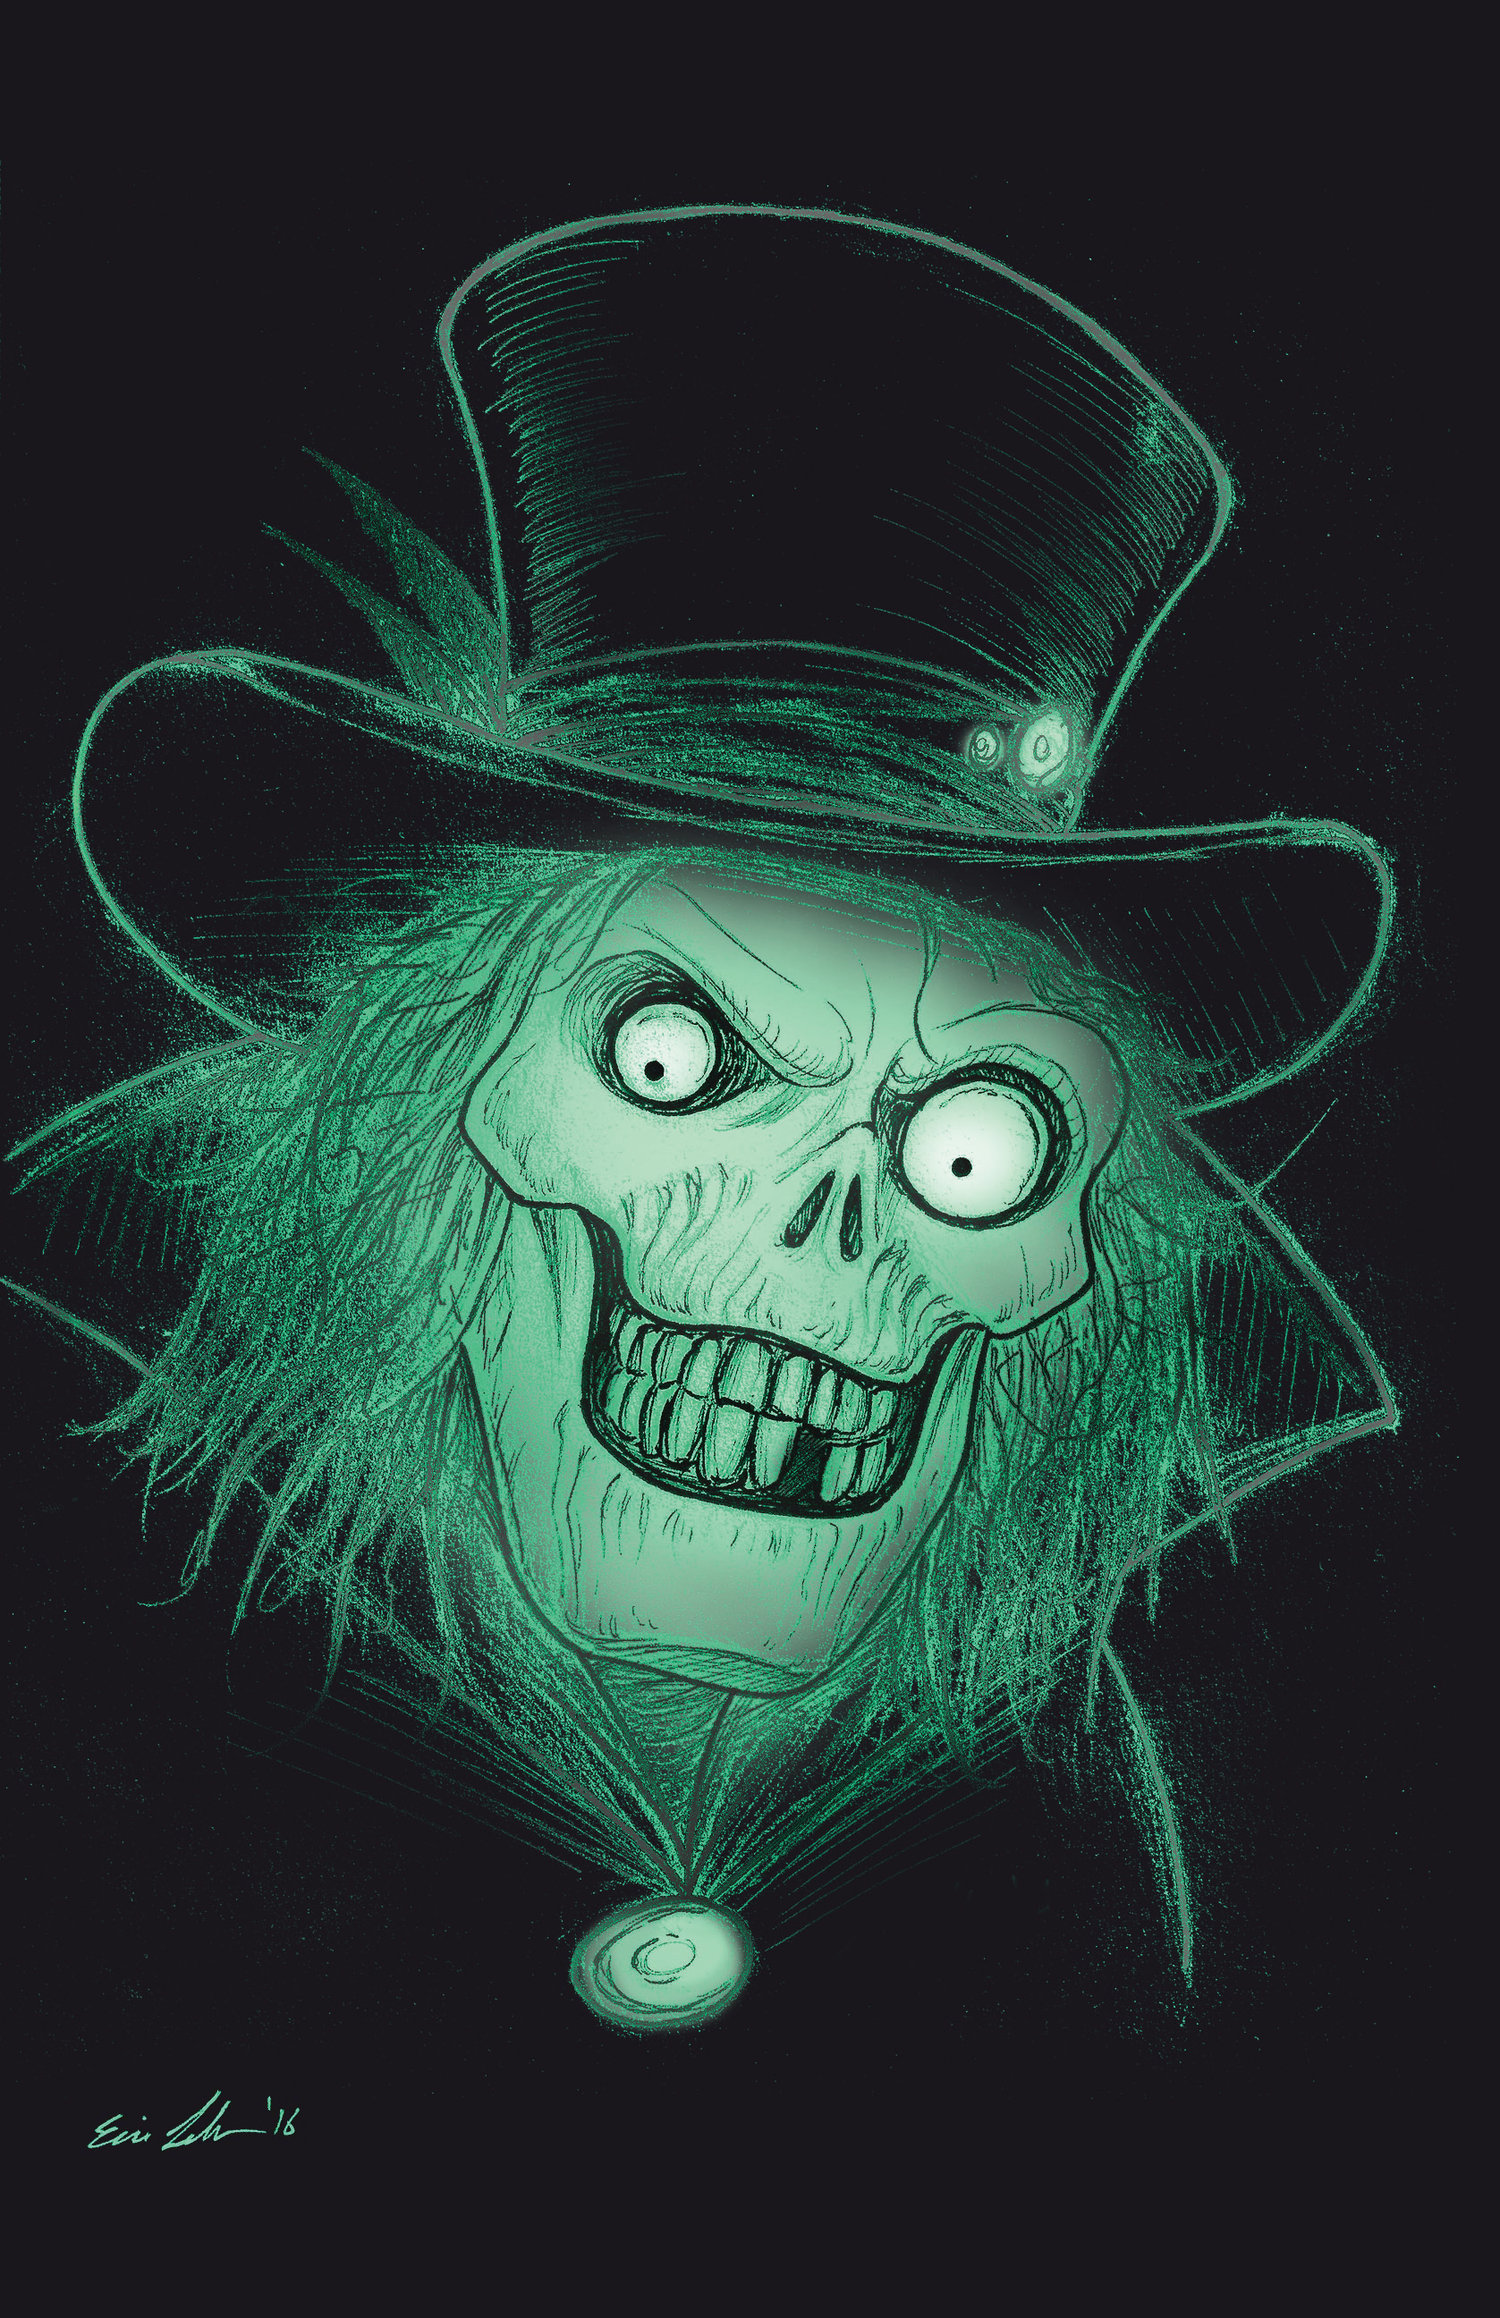 Image of "Hatbox Ghost" based on Disney's "The Haunted Mansion" limited art print